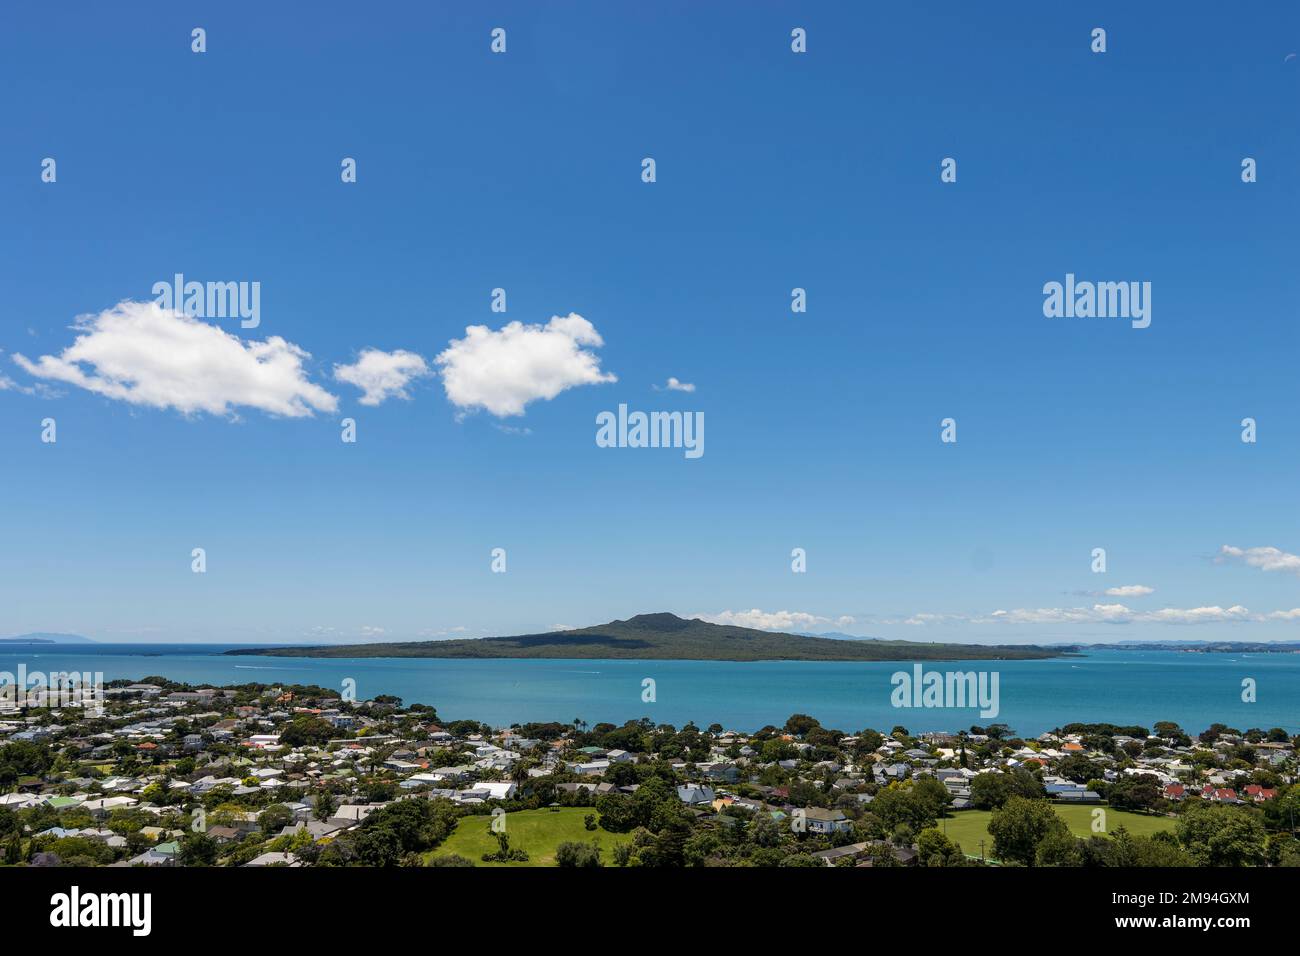 Rangitoto Island in Auckland, New Zealand from Devonport, It is summertime and the sun is high. Stock Photo